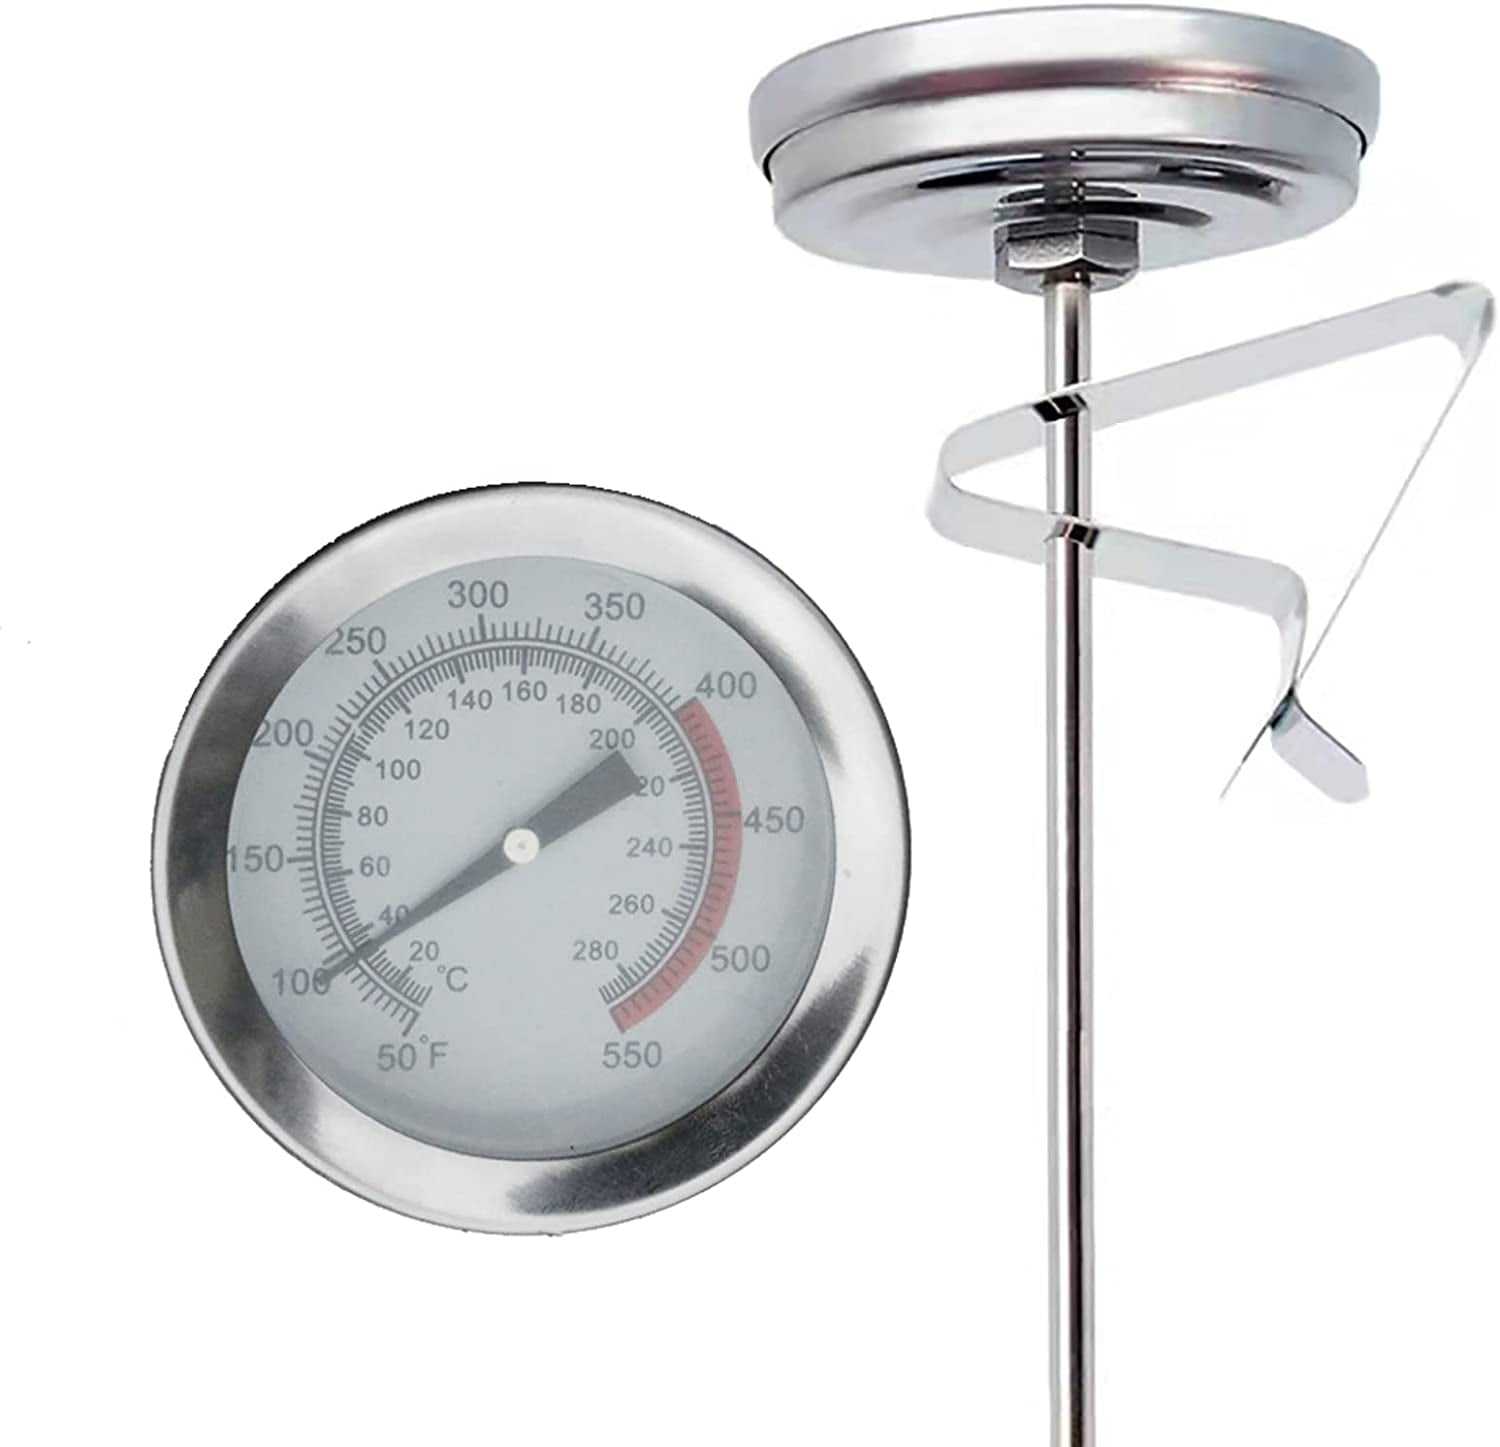  Cooking Thermometer Frying Pan Thermometer High Temperature  Stainless Steel Frying Oil Thermometer Fryer Fries Fried Chicken Wings  Barbecue Thermometer Gauge: Home & Kitchen